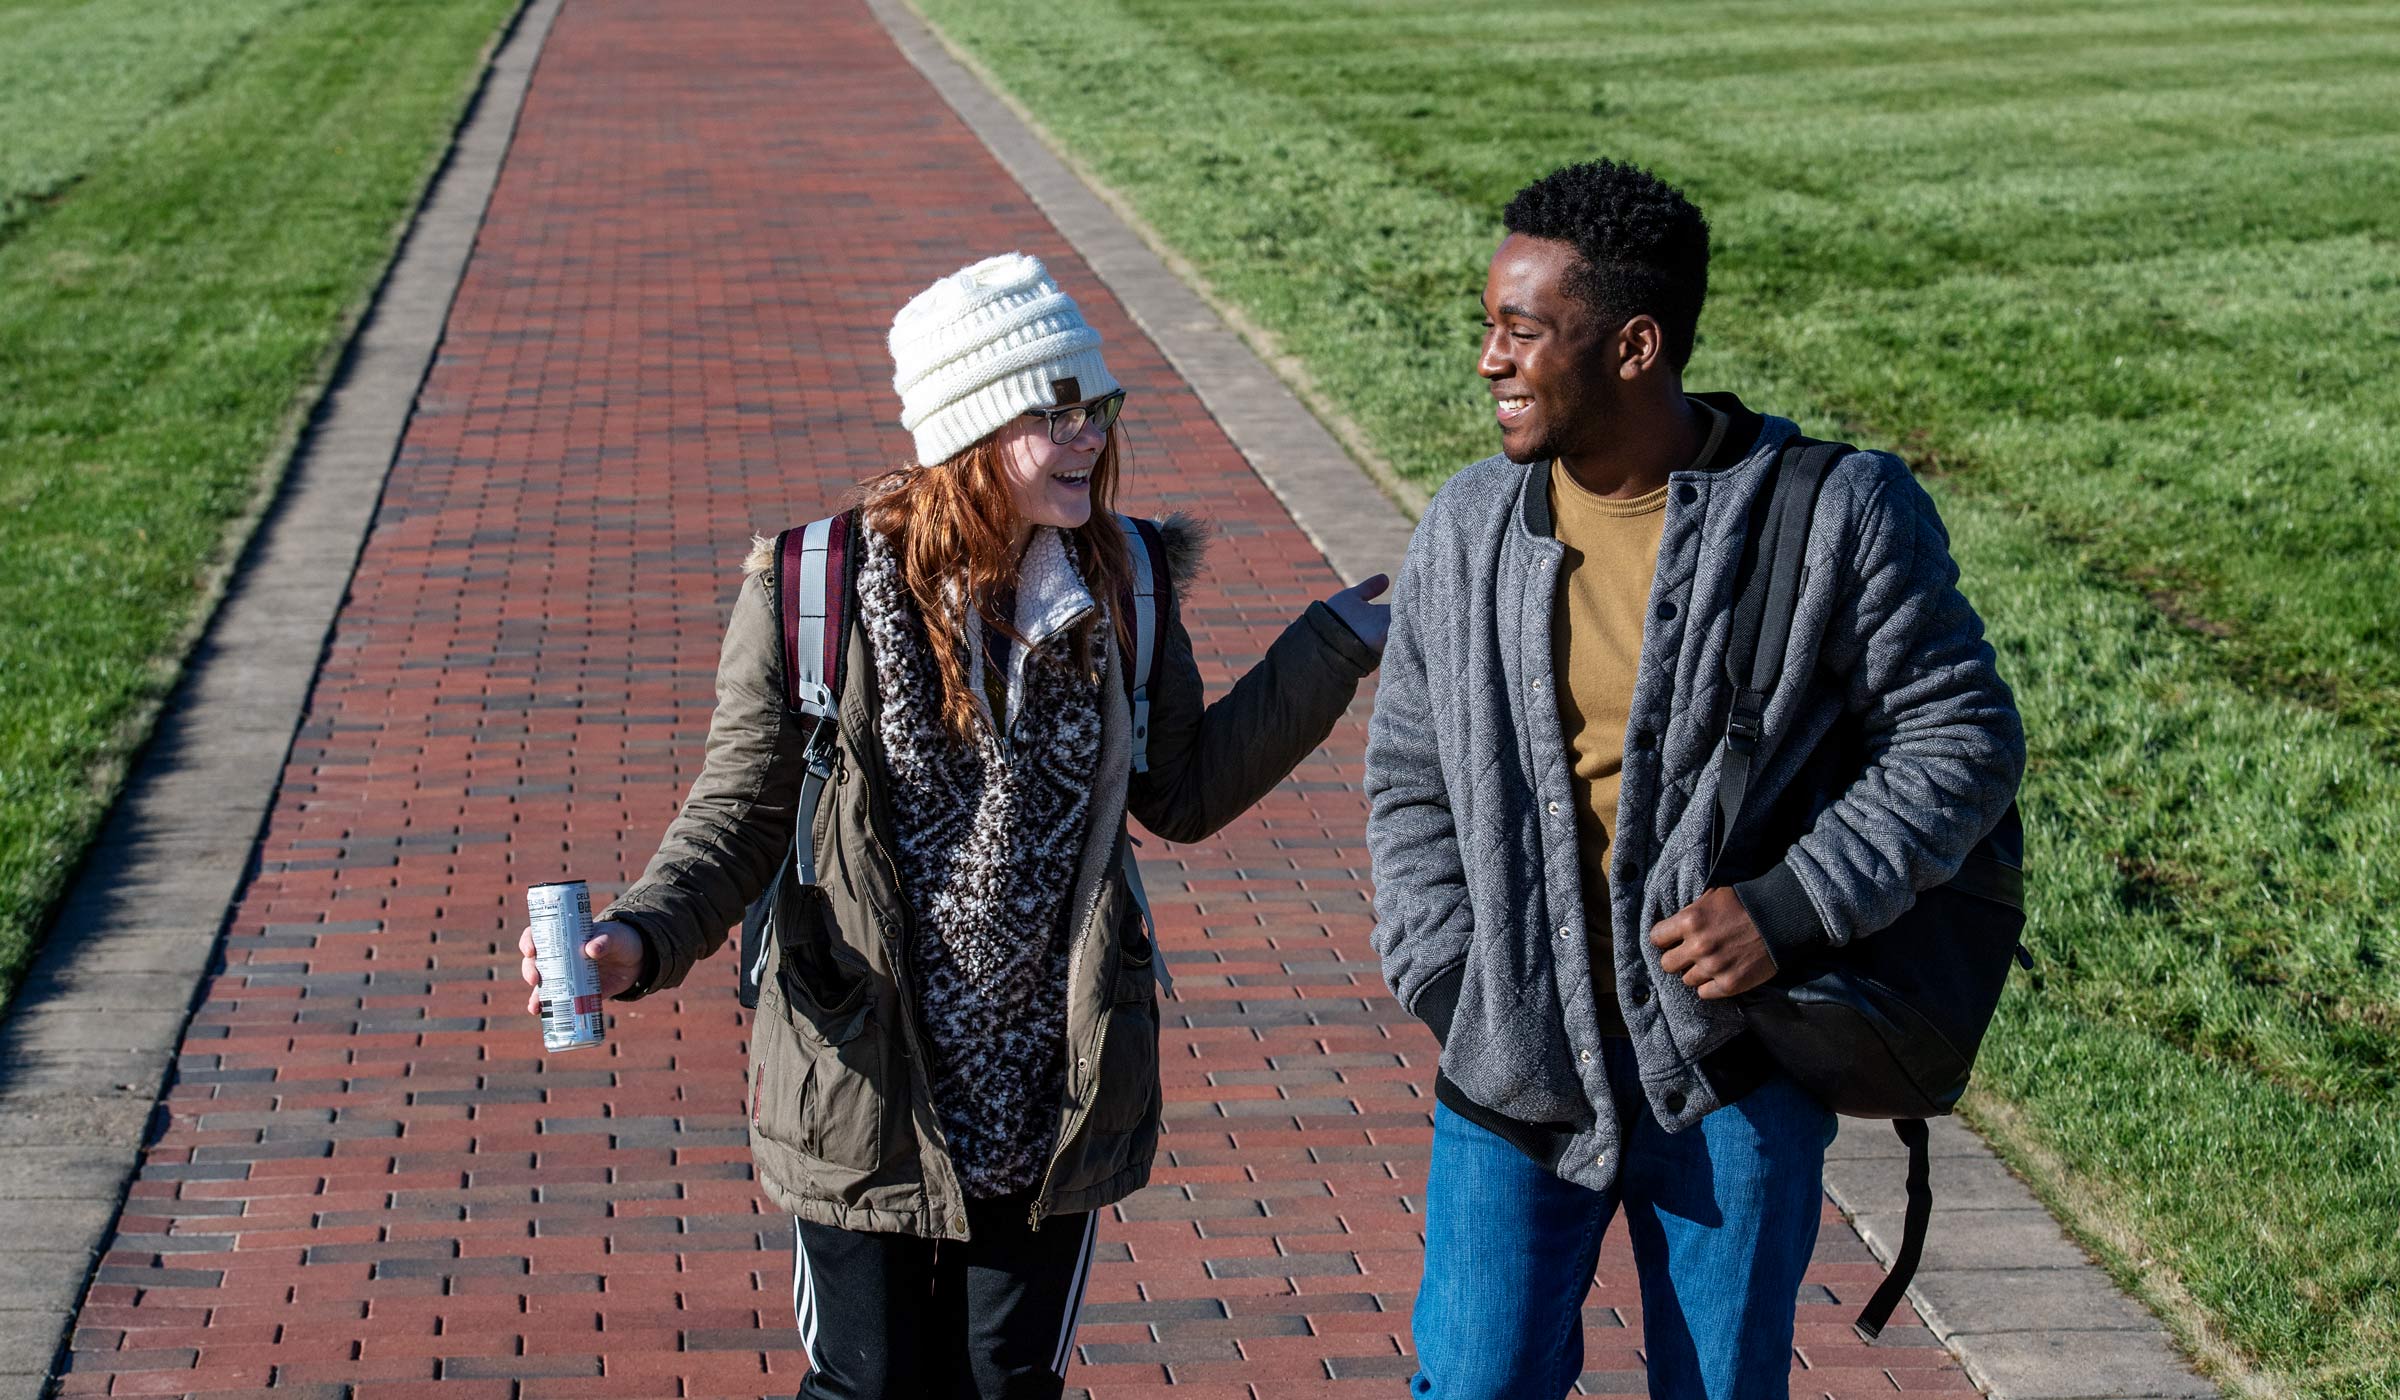 Dressed to ward of the morning chill, two students share a laugh as they walk on a Drill Field Sidewalk.